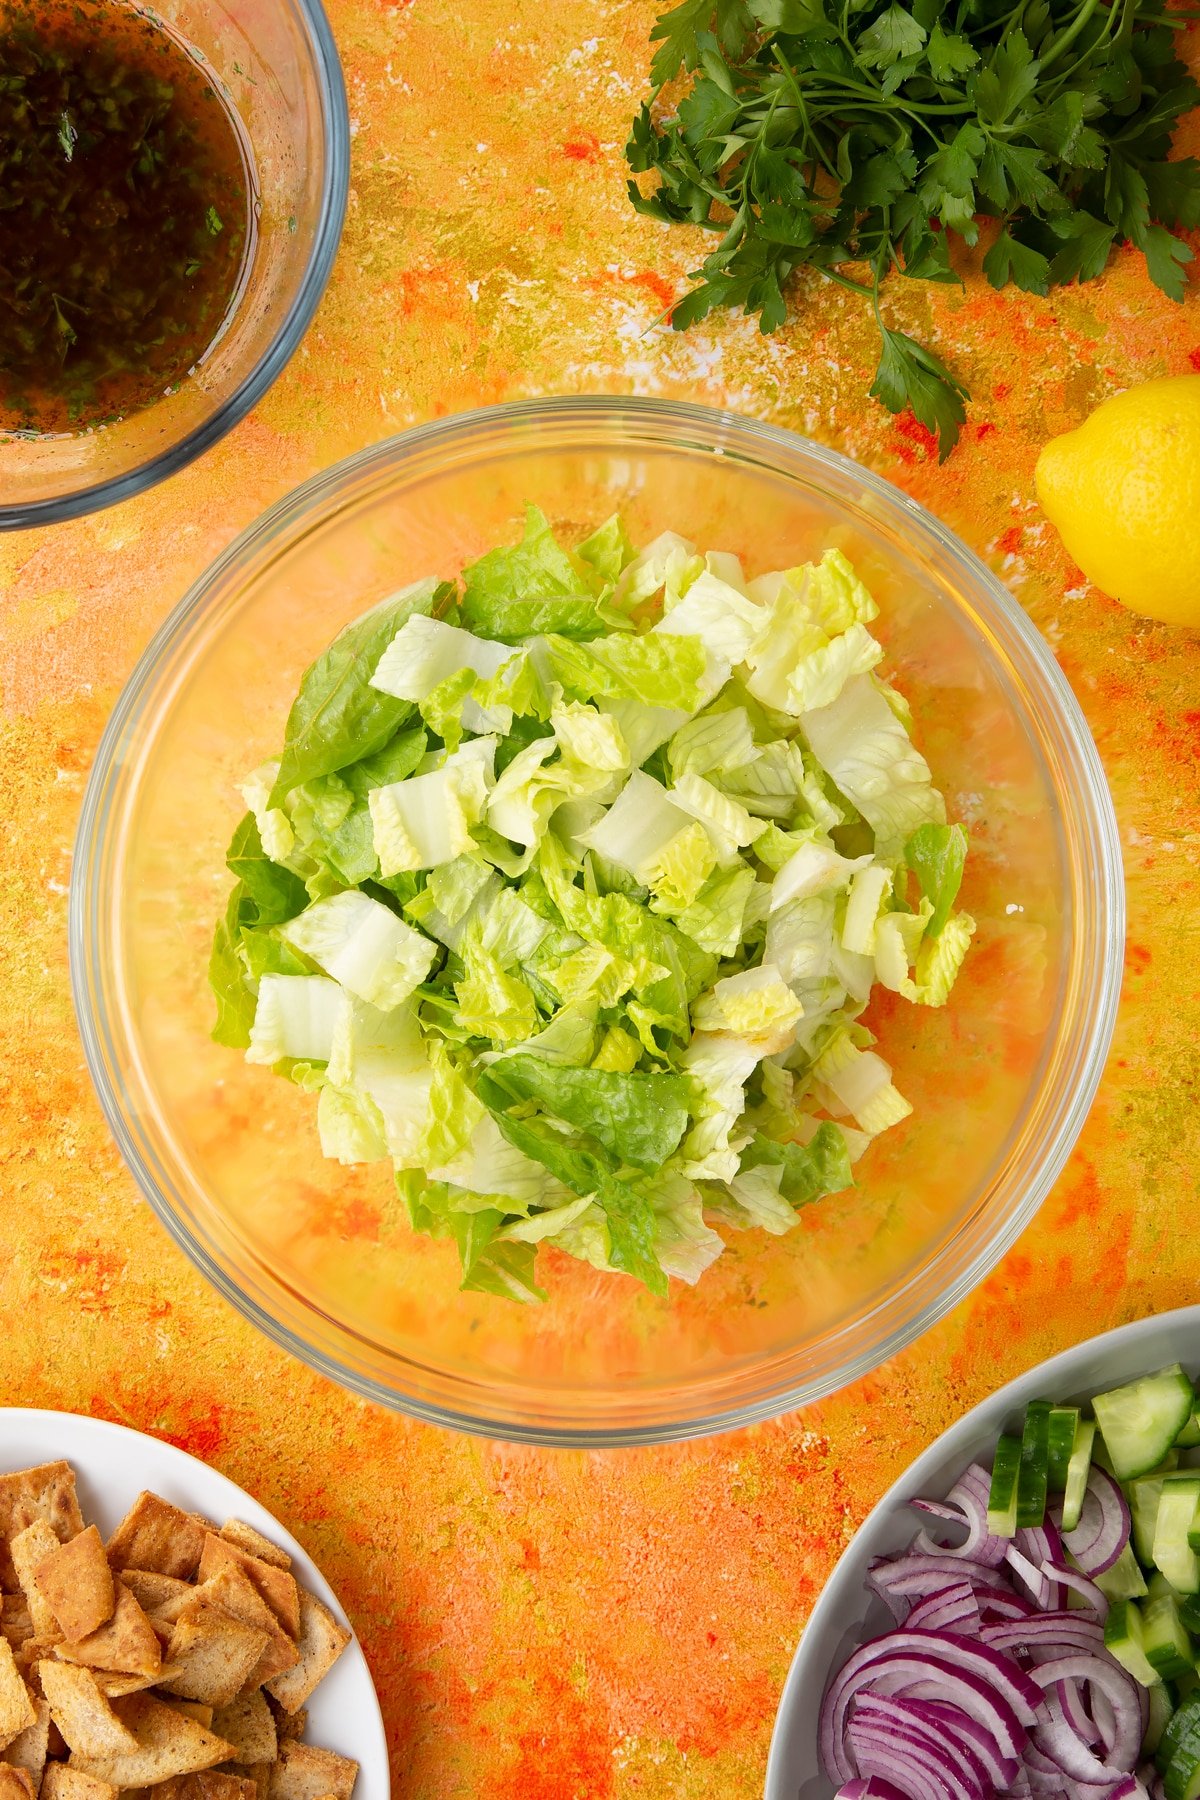 Lettuce in a glass mixing bowl. Ingredients to make vegan fattoush surround the bowl.